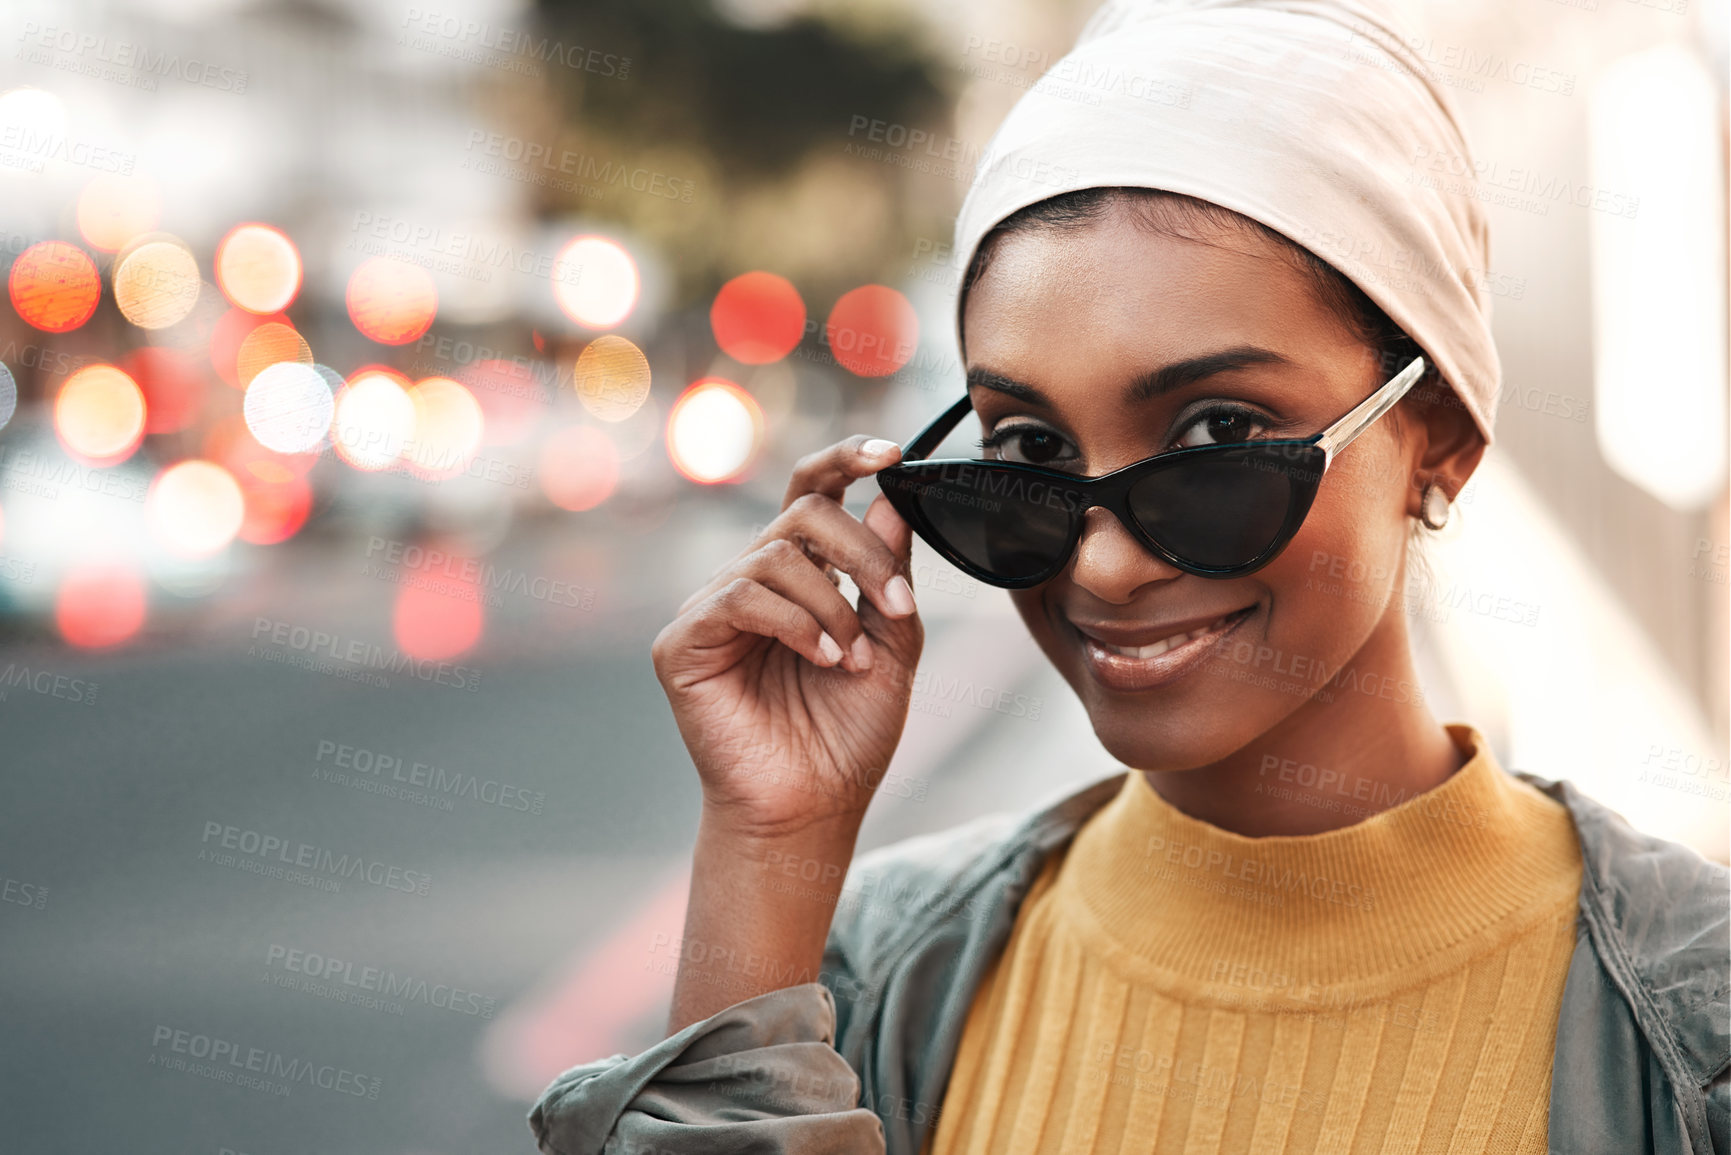 Buy stock photo Cropped shot of an attractive young woman standing alone in the city and looking alluringly over her sunglasses